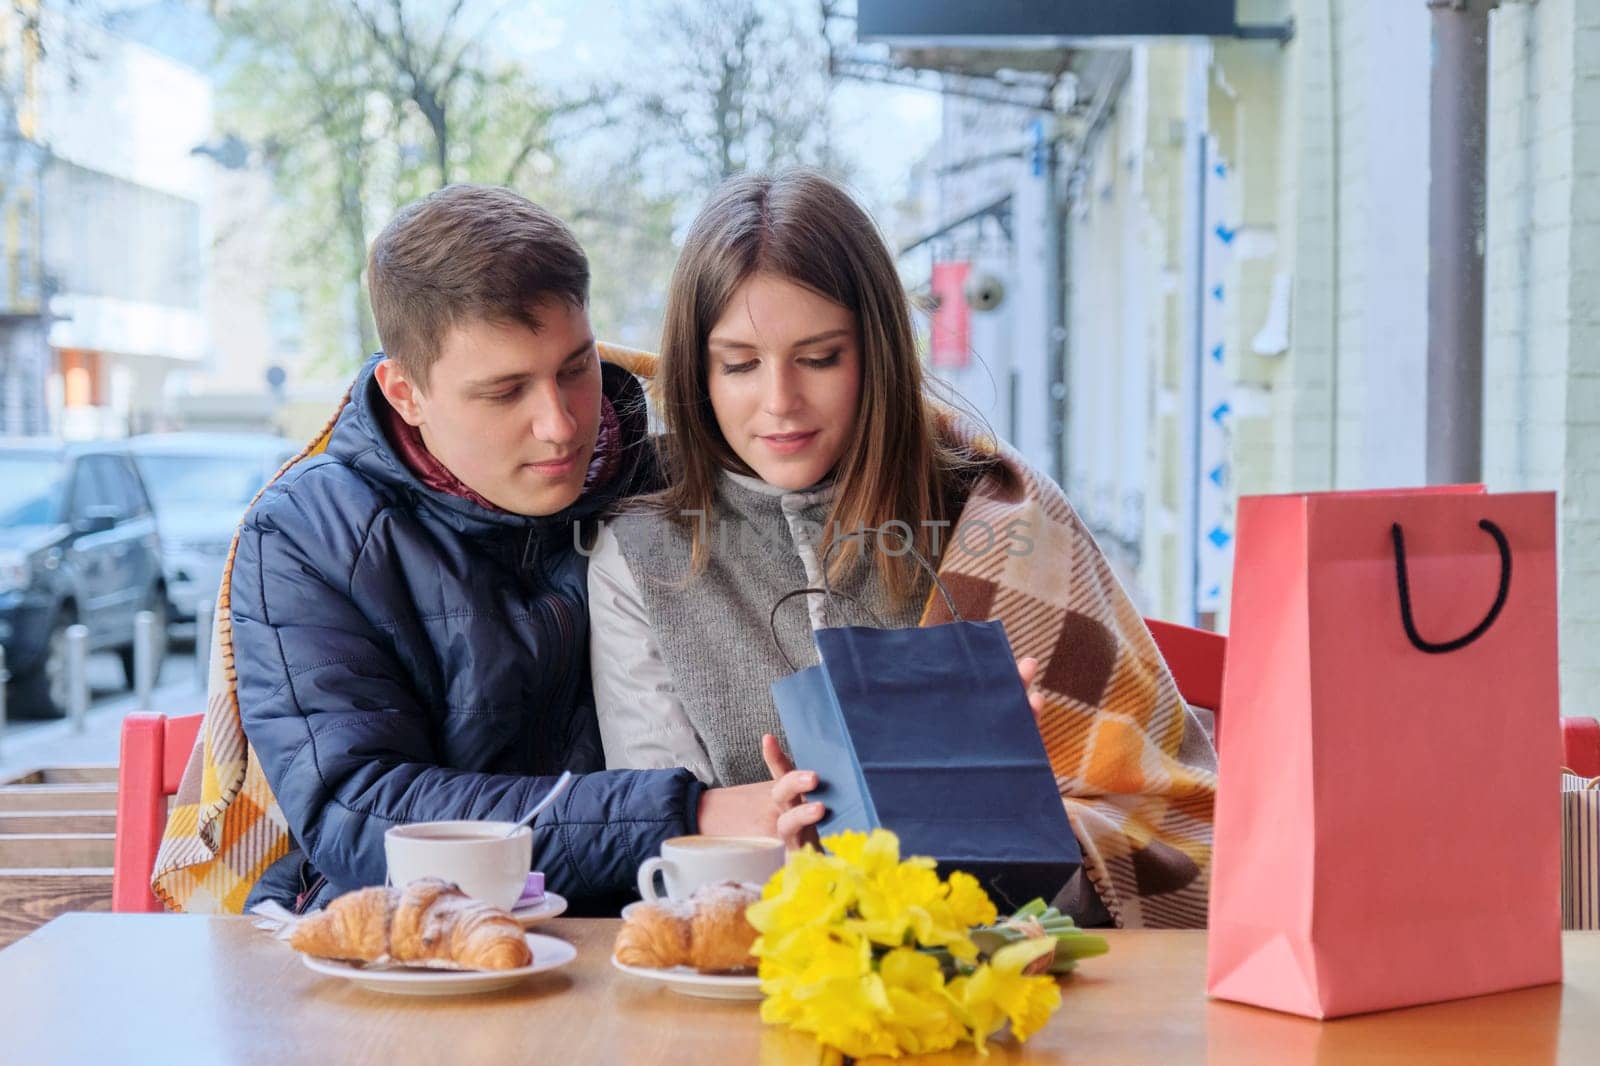 Young couple in outdoor cafe with shopping bags, looking at purchases, drinking coffee